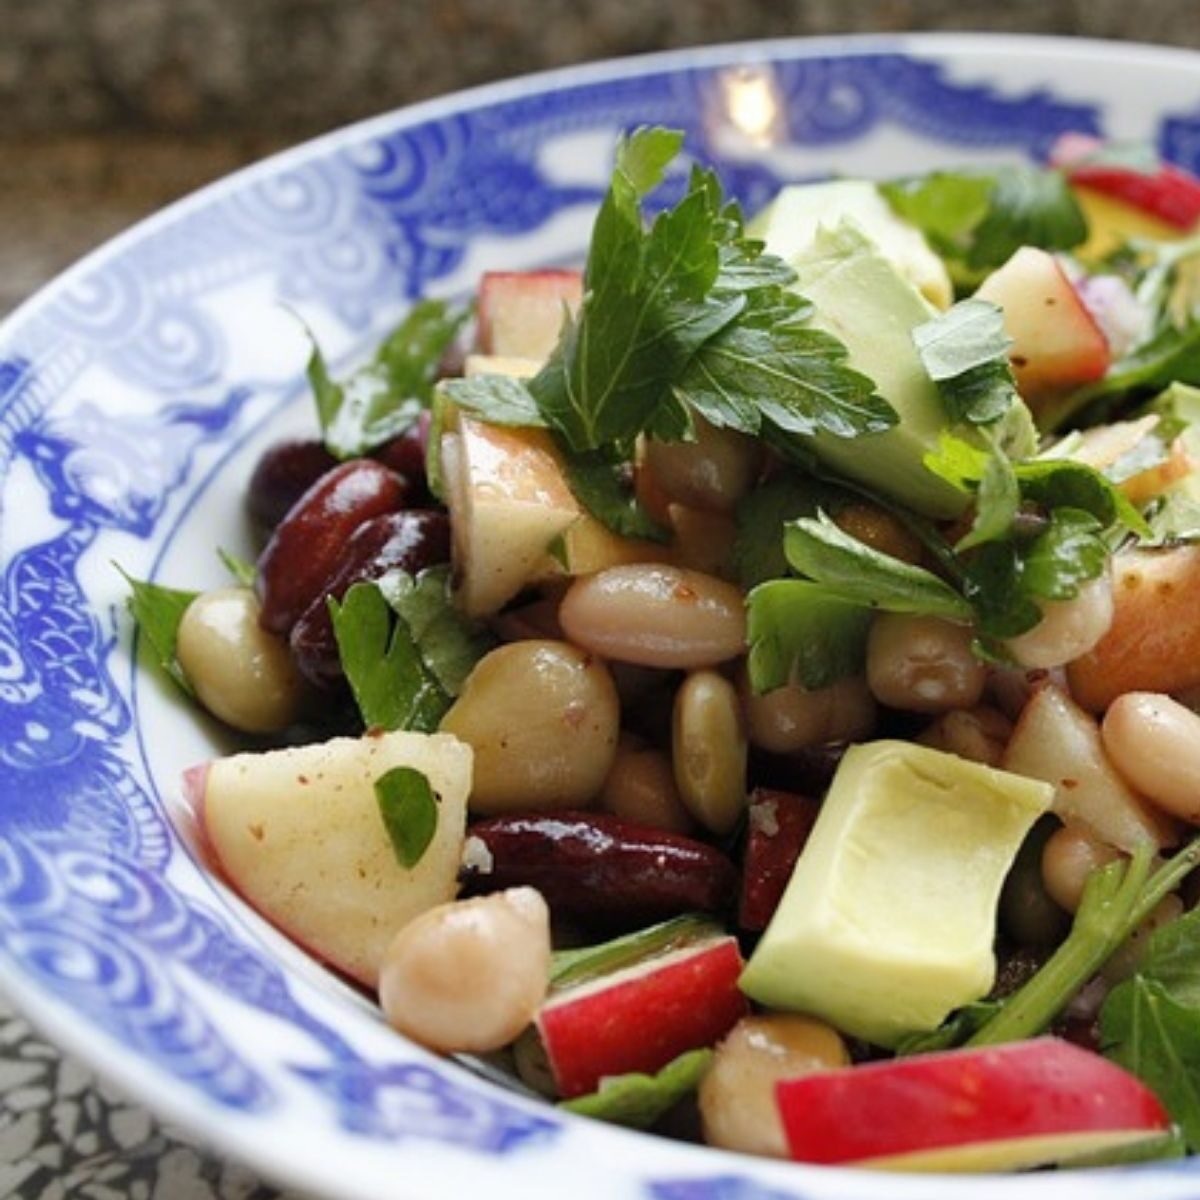 Bowl of bean salad with chickpeas, apple, and avocado.